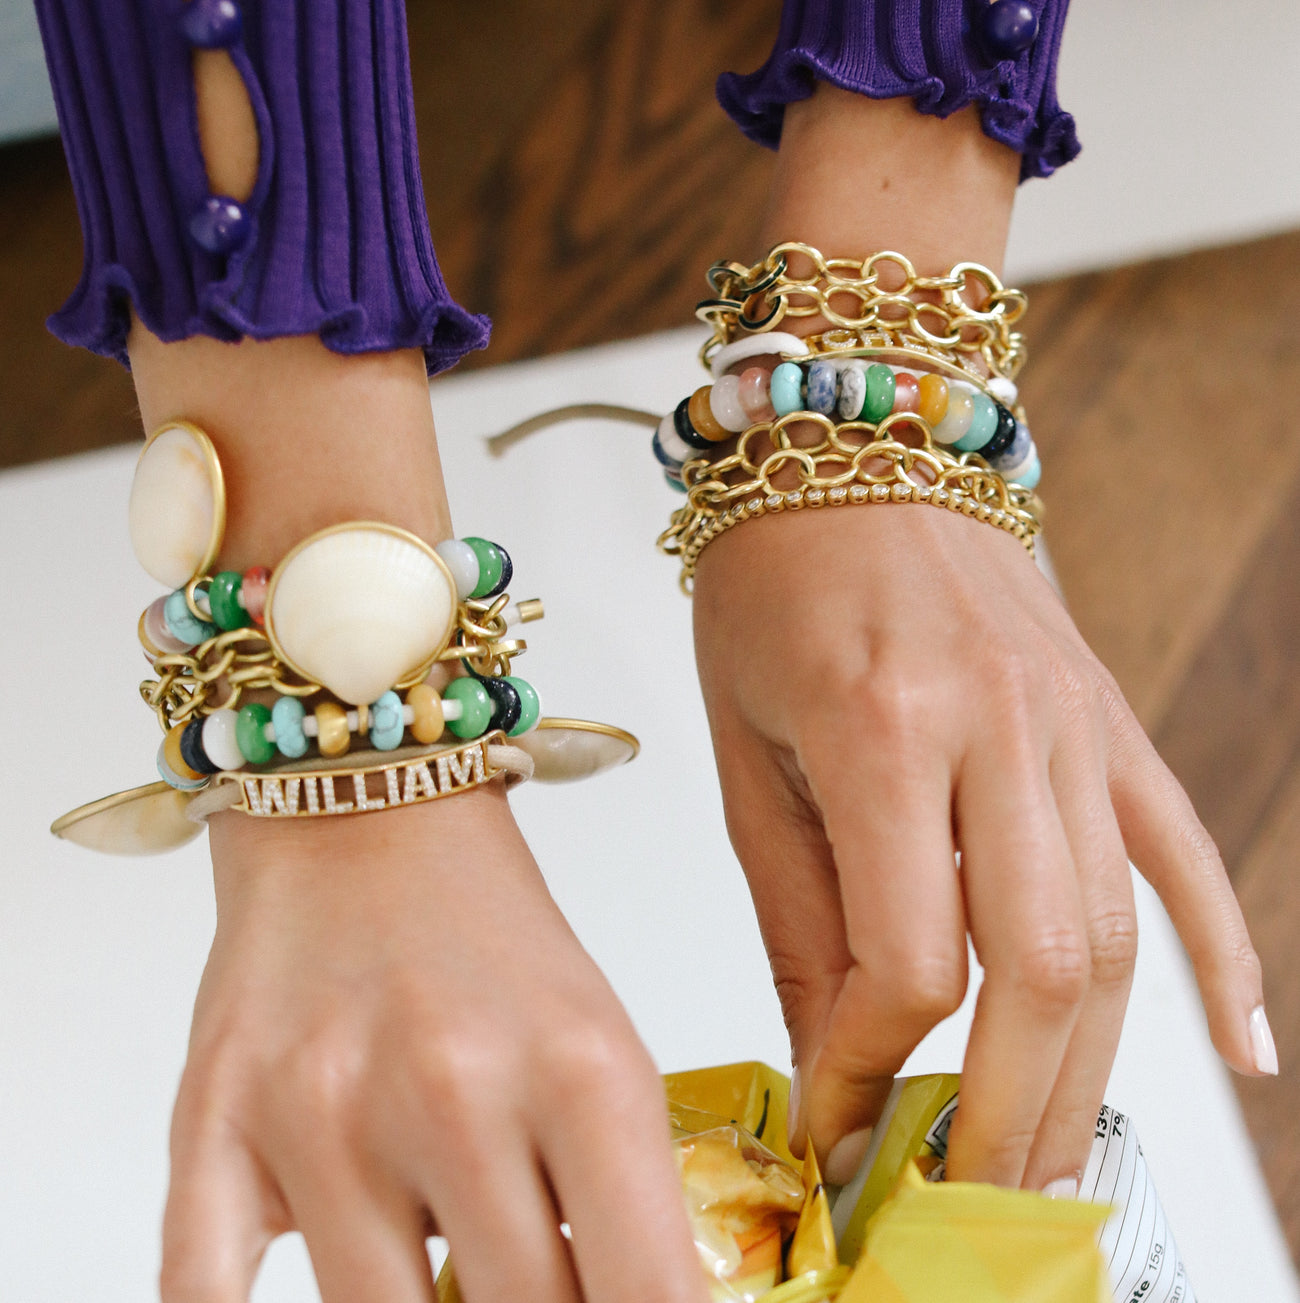 styled bracelets on wrists hands opening a bag of chips